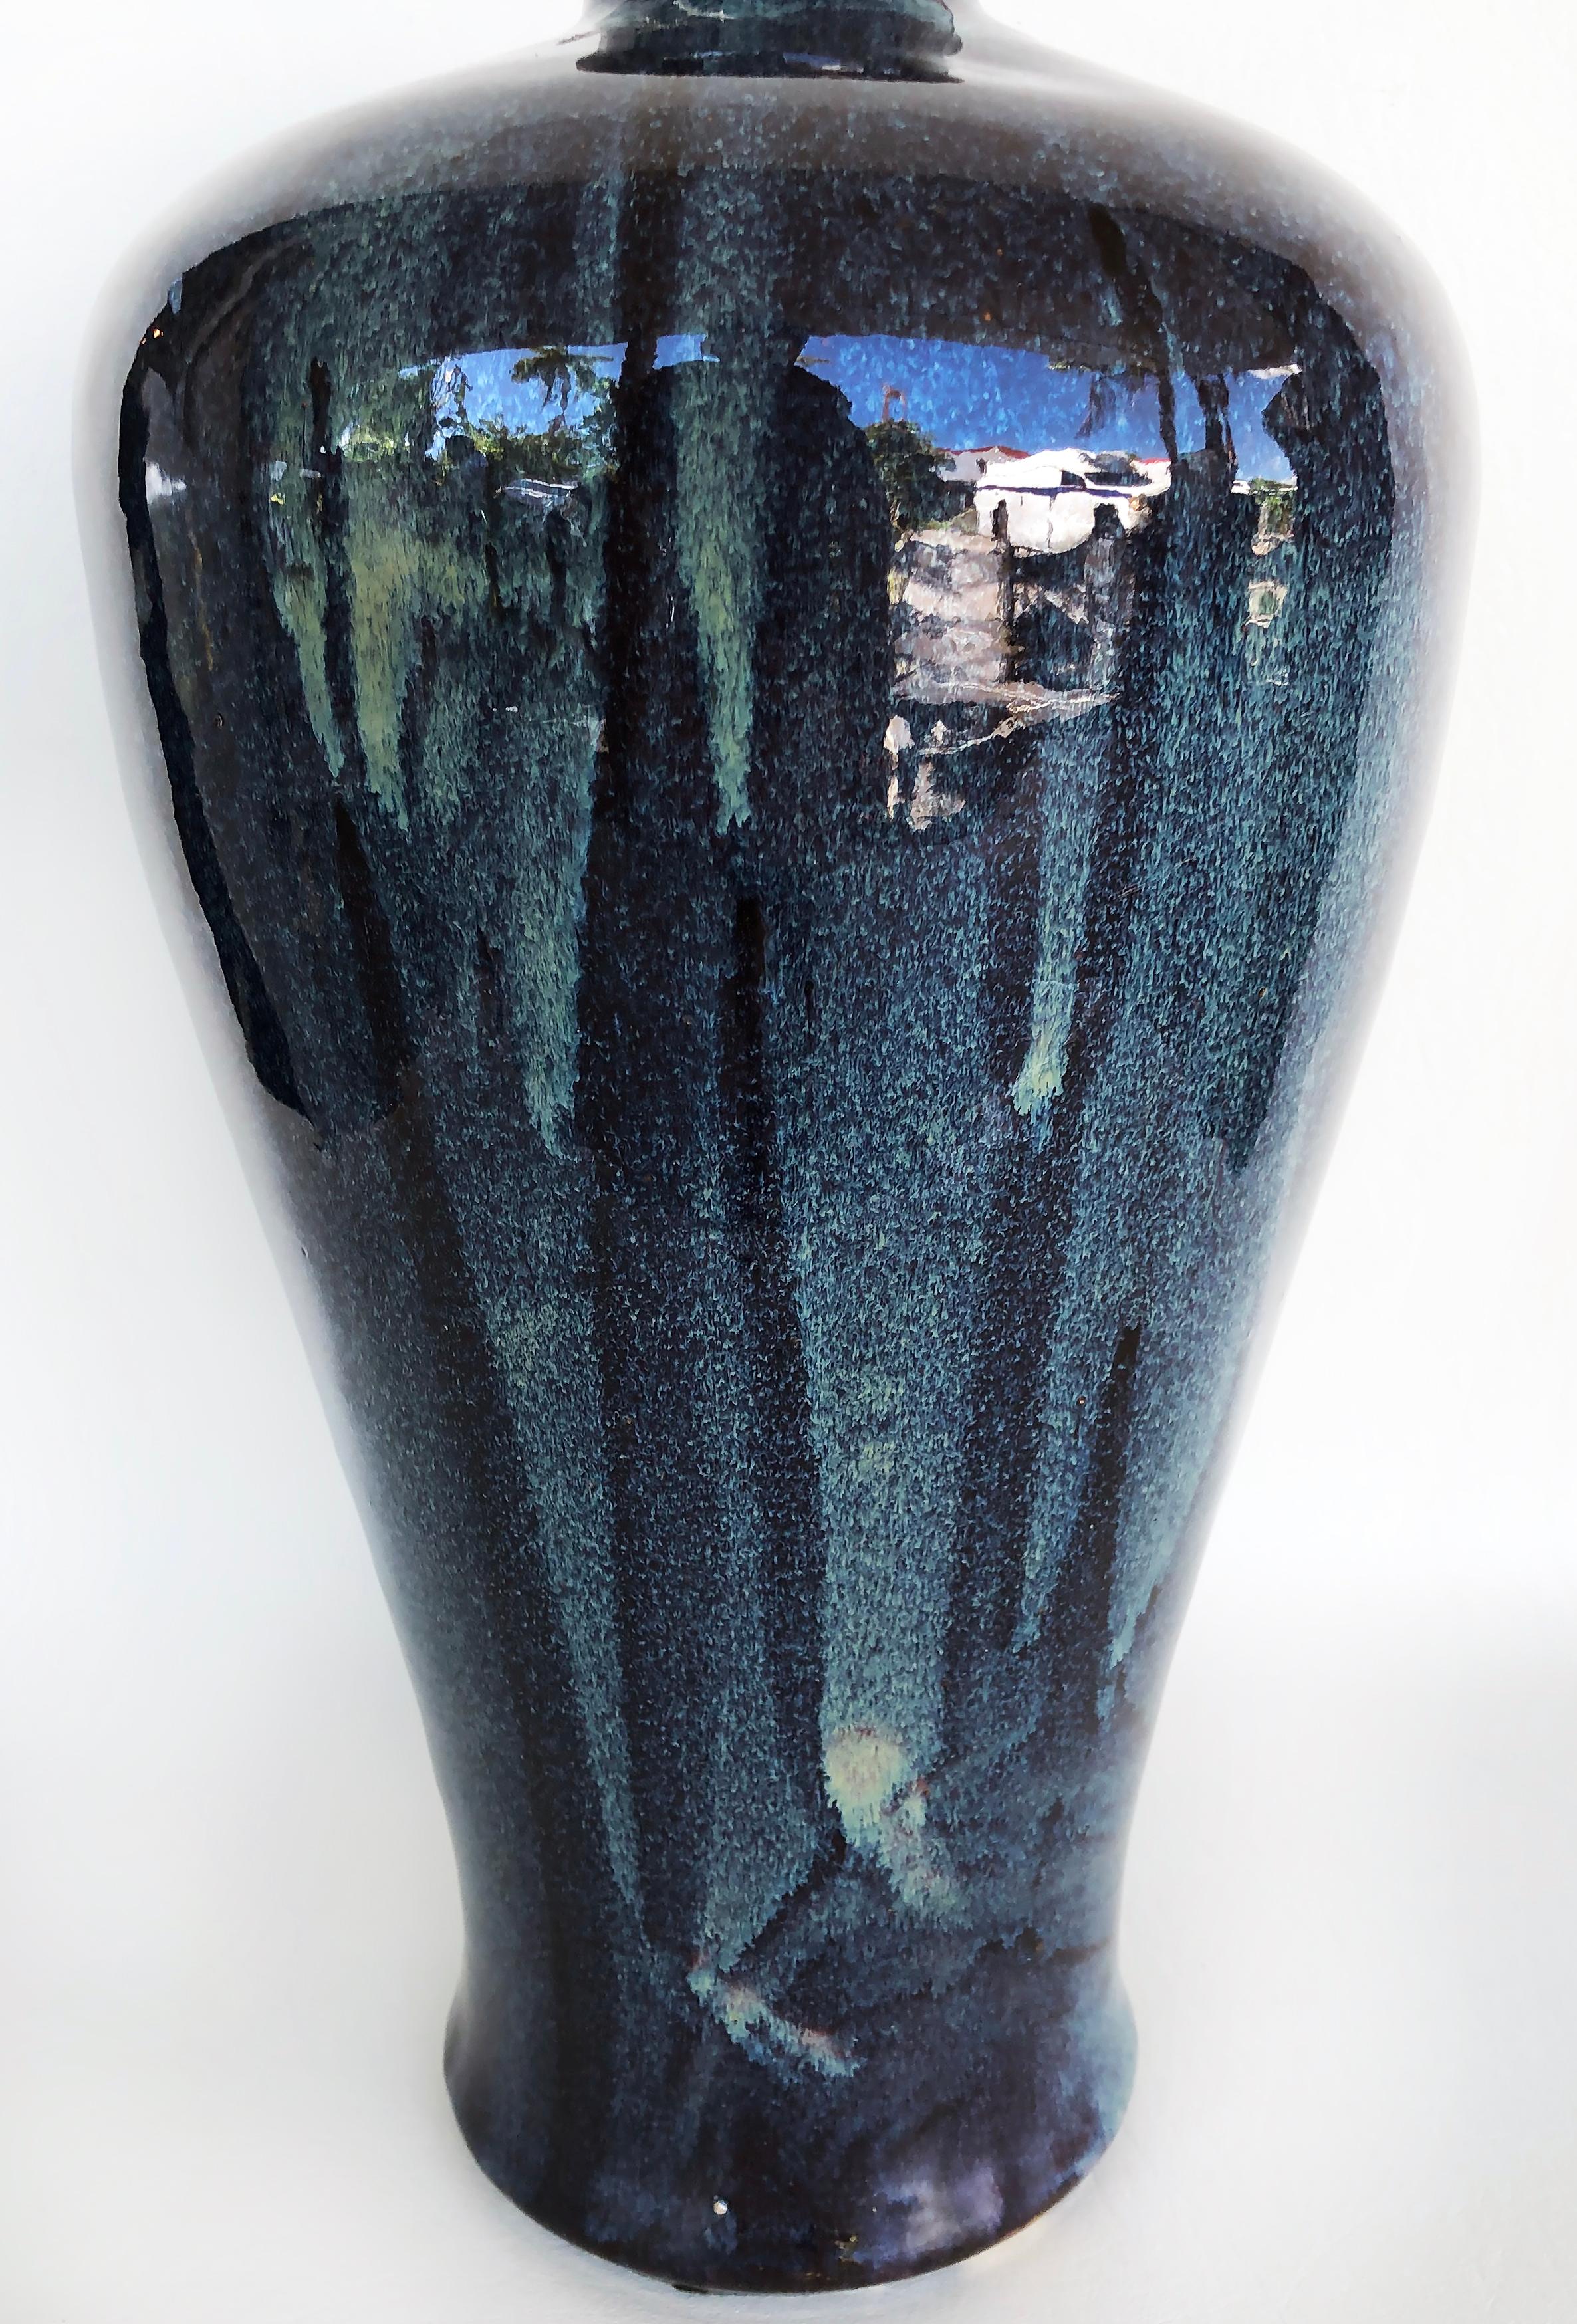 Chinese Blue Drip Glazed Ceramic Urn Vases, a Pair In Good Condition For Sale In Miami, FL